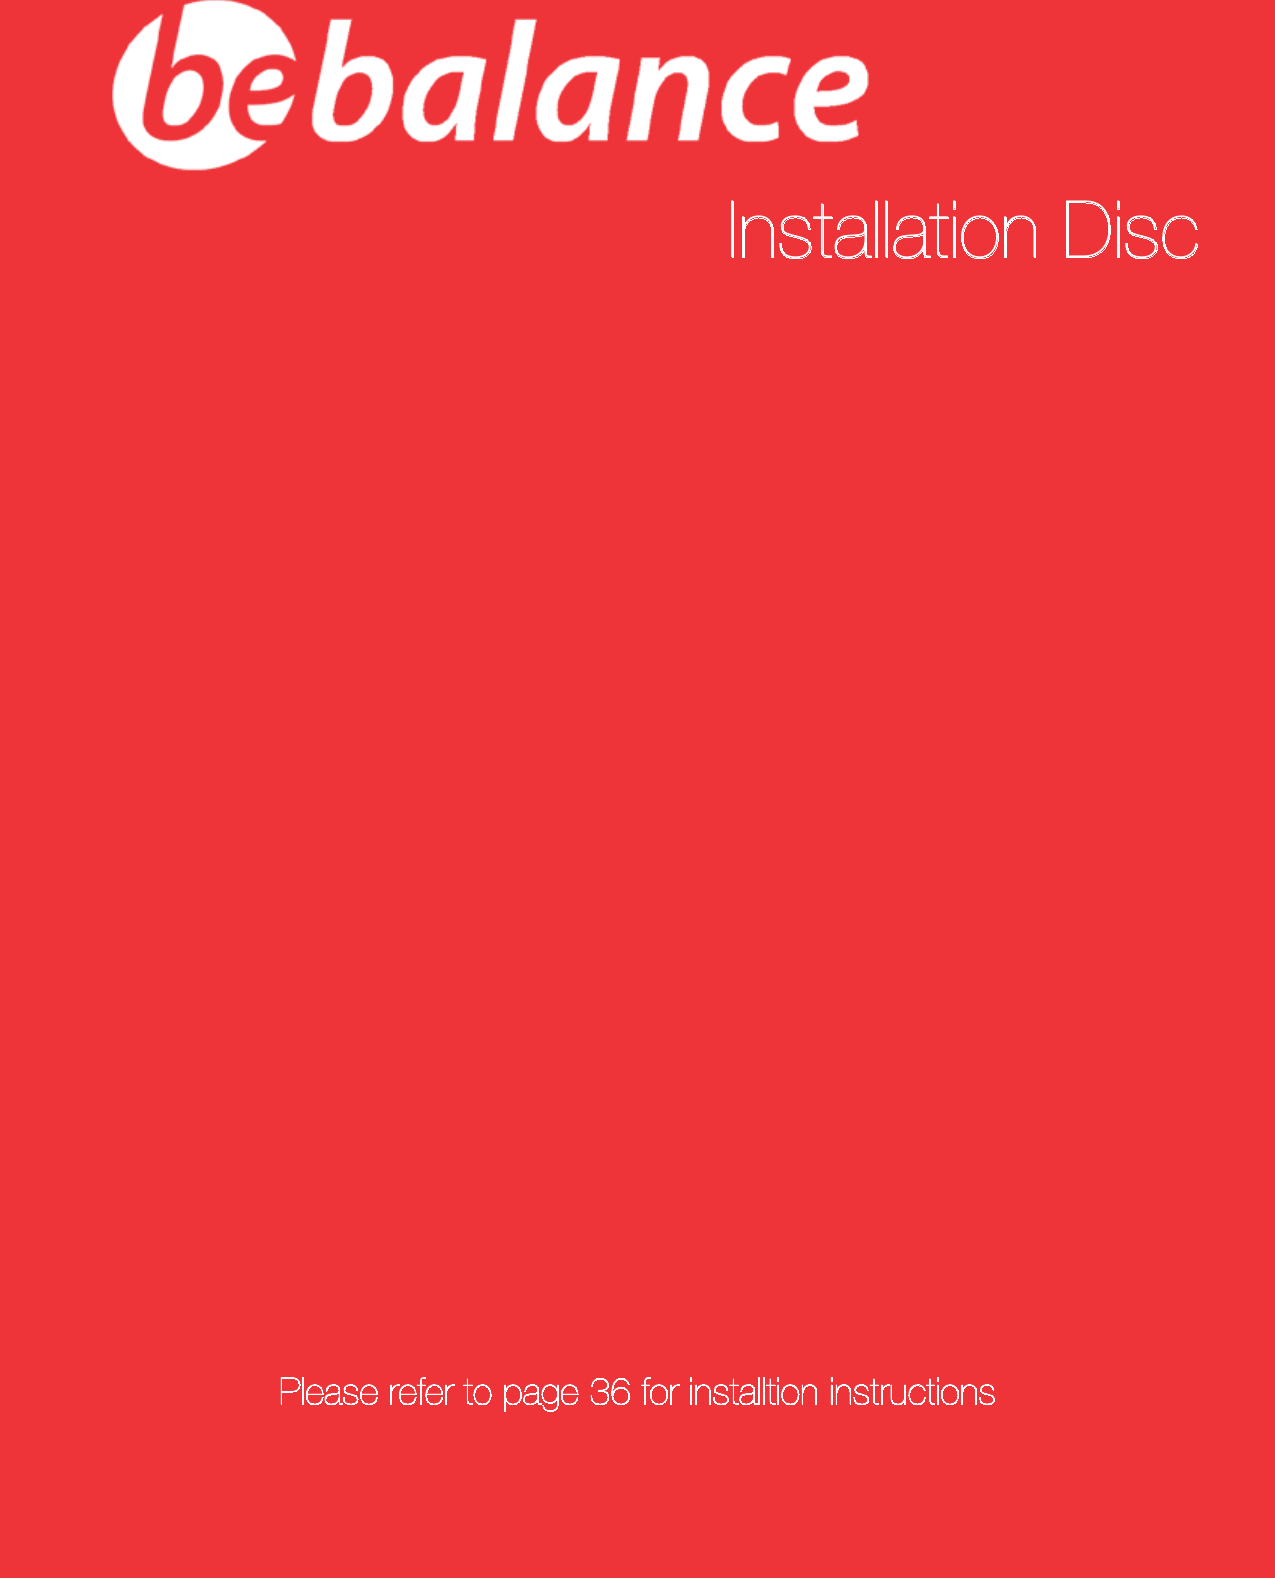 67Installation DiscPlease refer to page 36 for installtion instructions